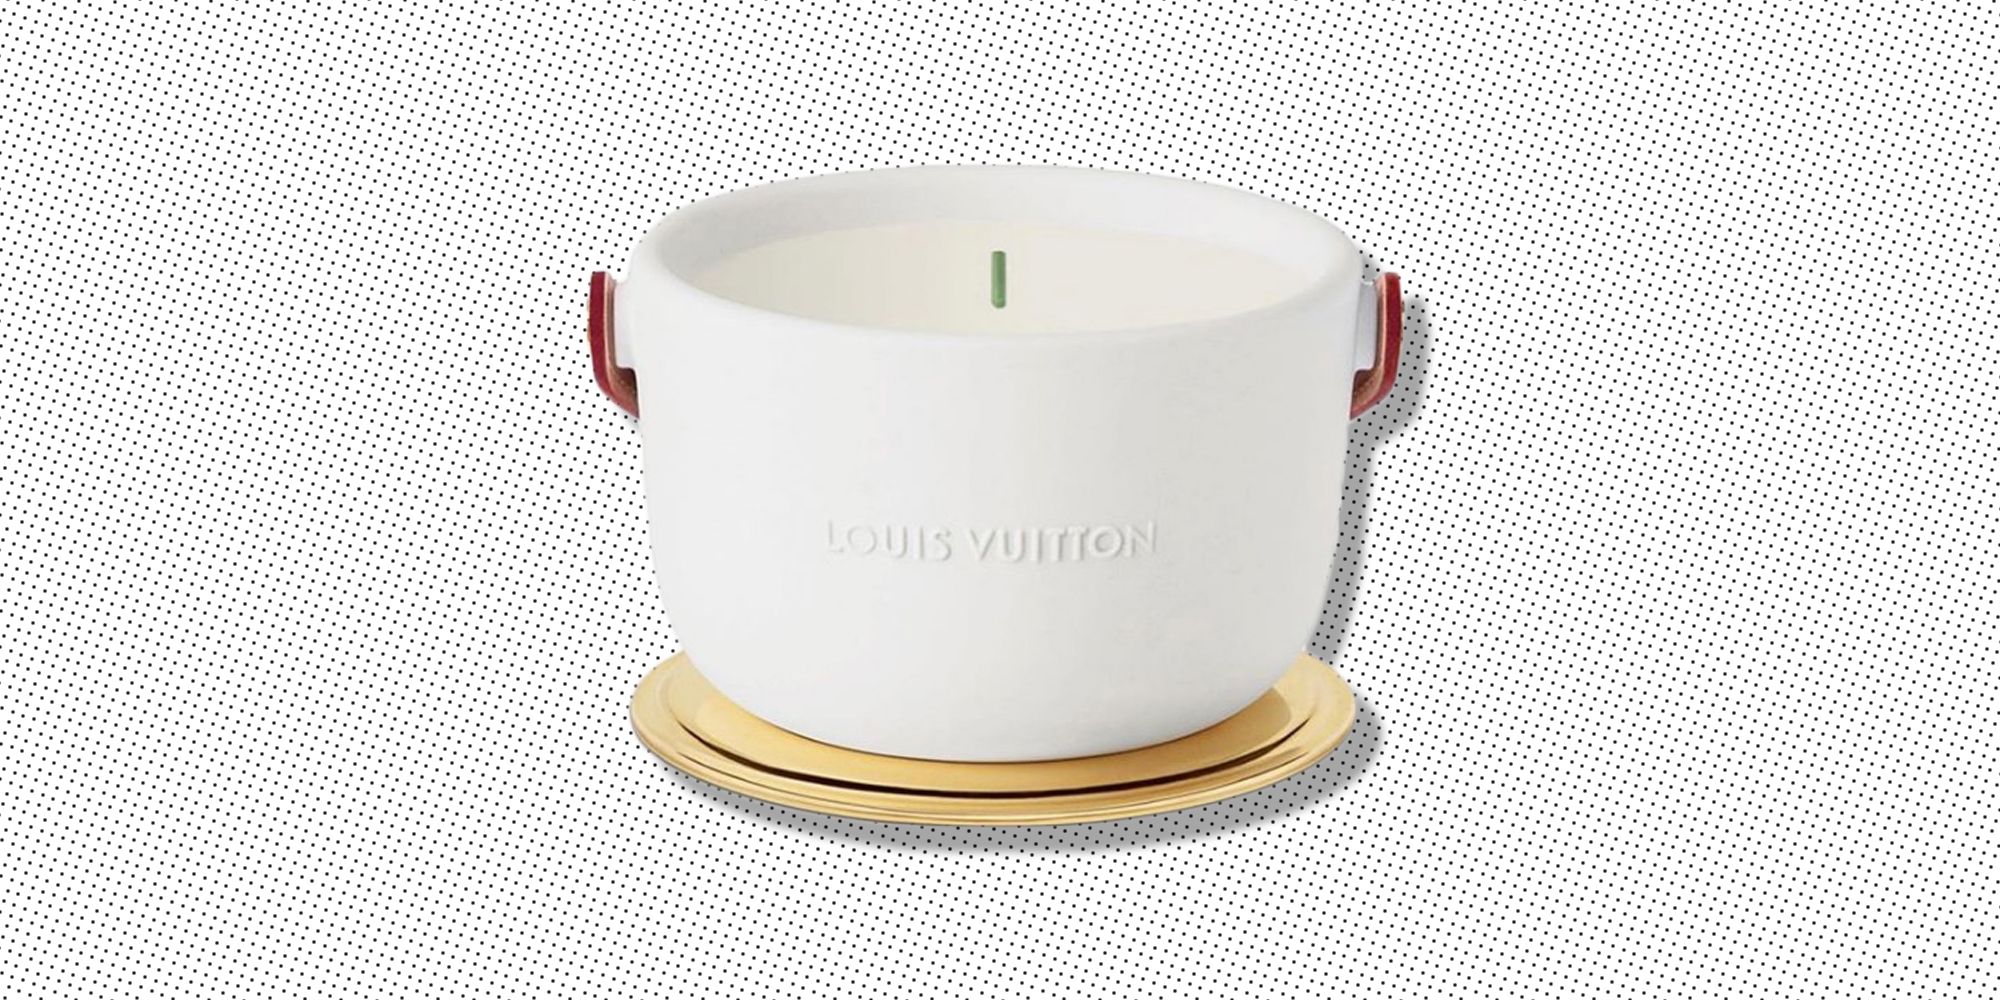 Louis Vuitton's Set Of Miniature Perfumed Candles Is A Very Chic Way To  Cozy Up Your Space